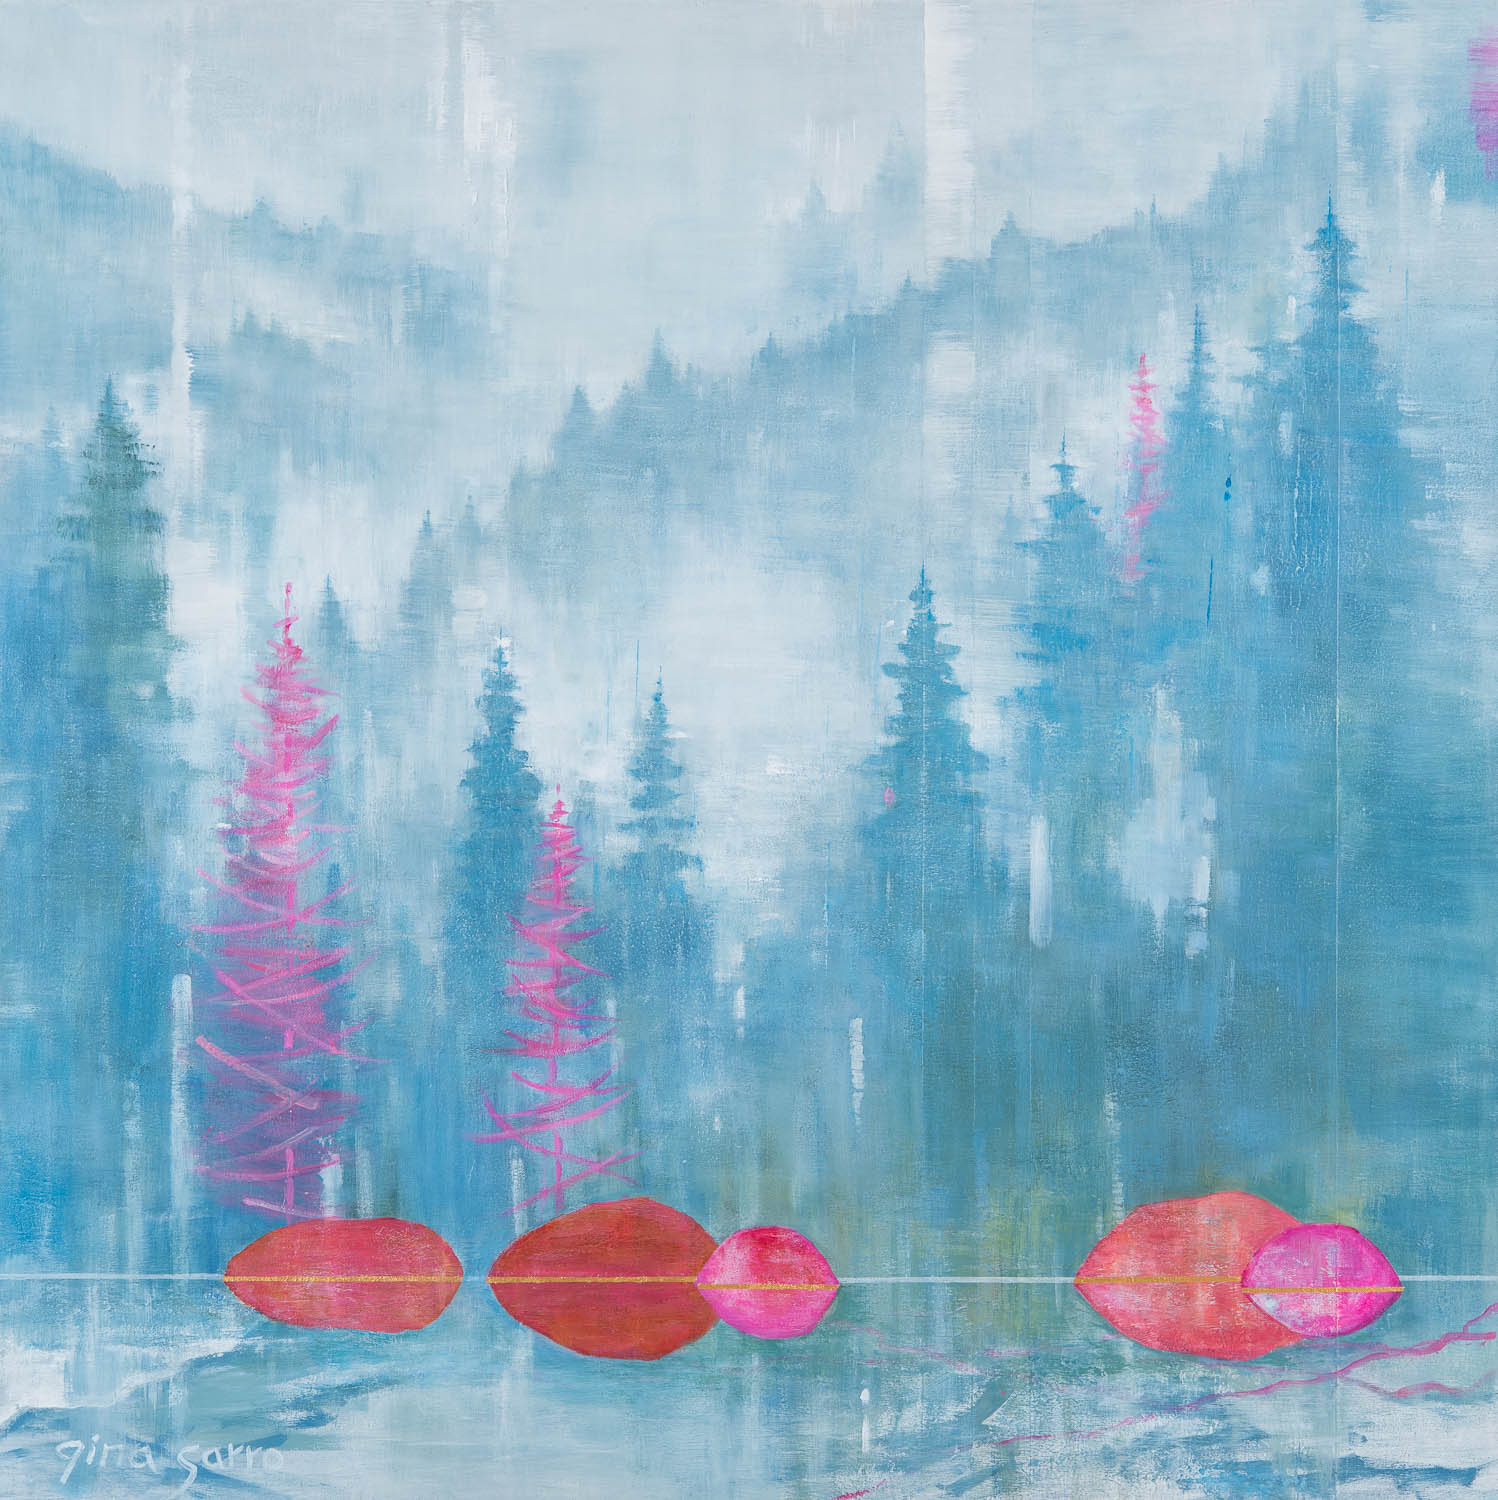 Closer to You, acrylic landscape painting by Gina Sarro | Effusion Art Gallery + Cast Glass Studio, Invermere BC